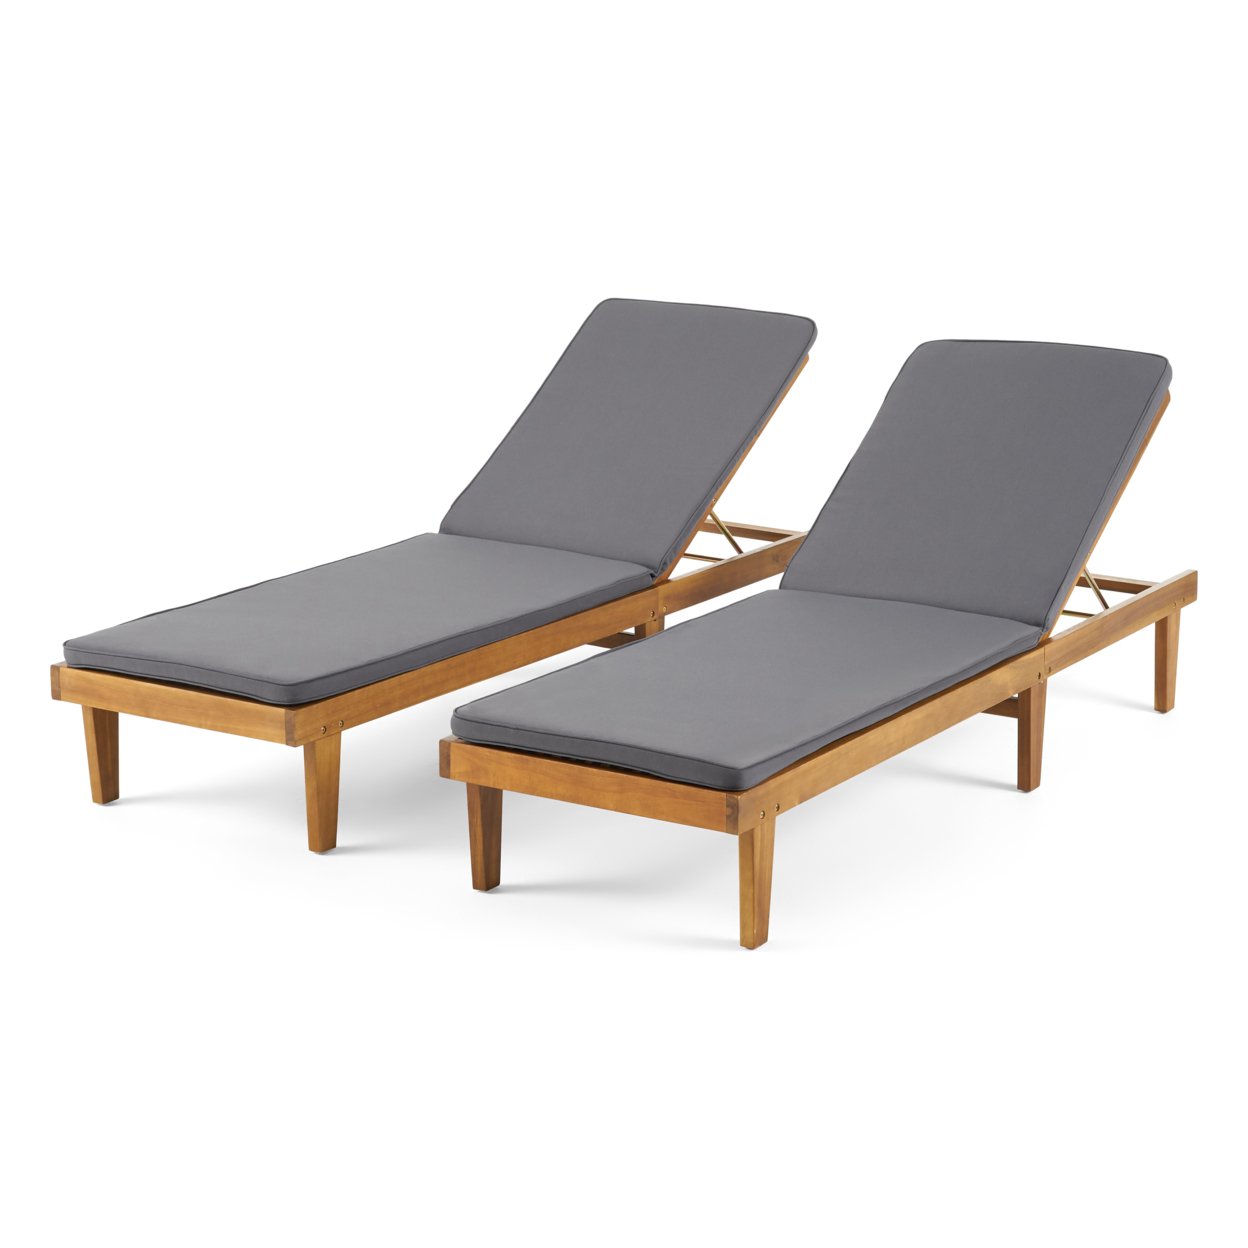 Madge Oudoor Modern Acacia Wood Chaise Lounge With Cushion (Set Of 2) - Gray Finish + Blue